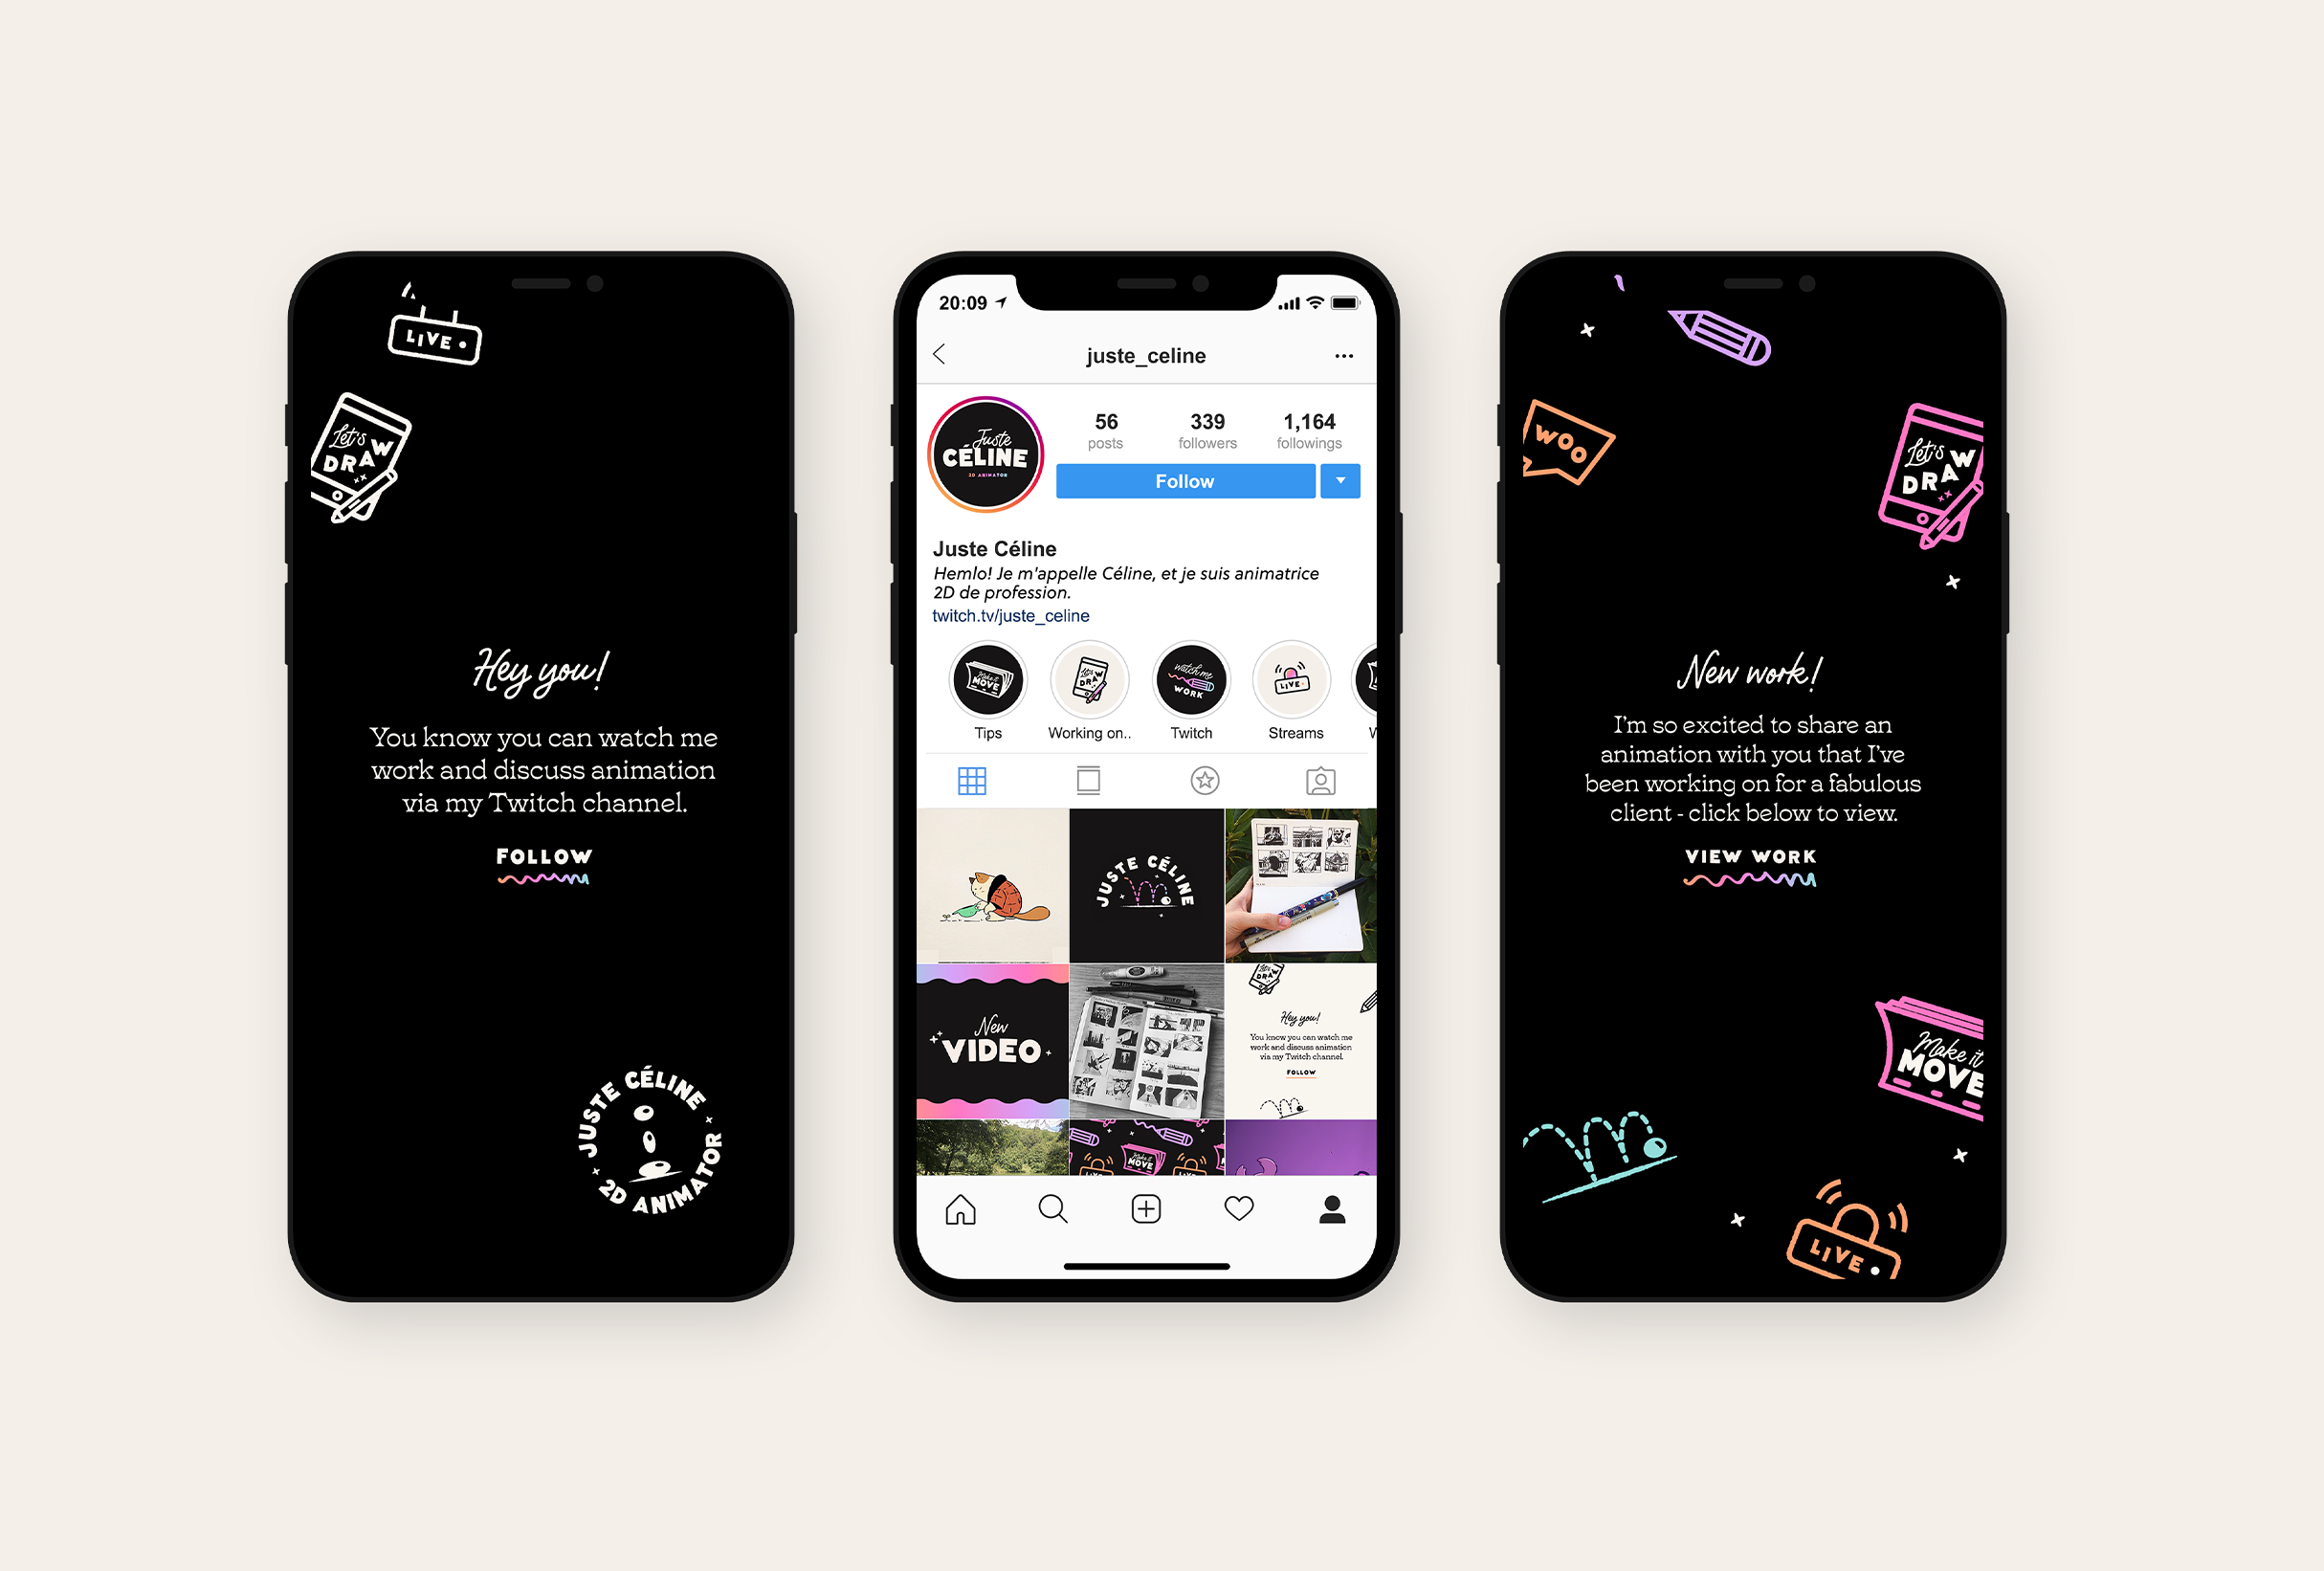 Instagram strategy for Juste Céline, Twitch streamer and 2D animator - designed by Wiltshire-based graphic designer, Kaye Huett